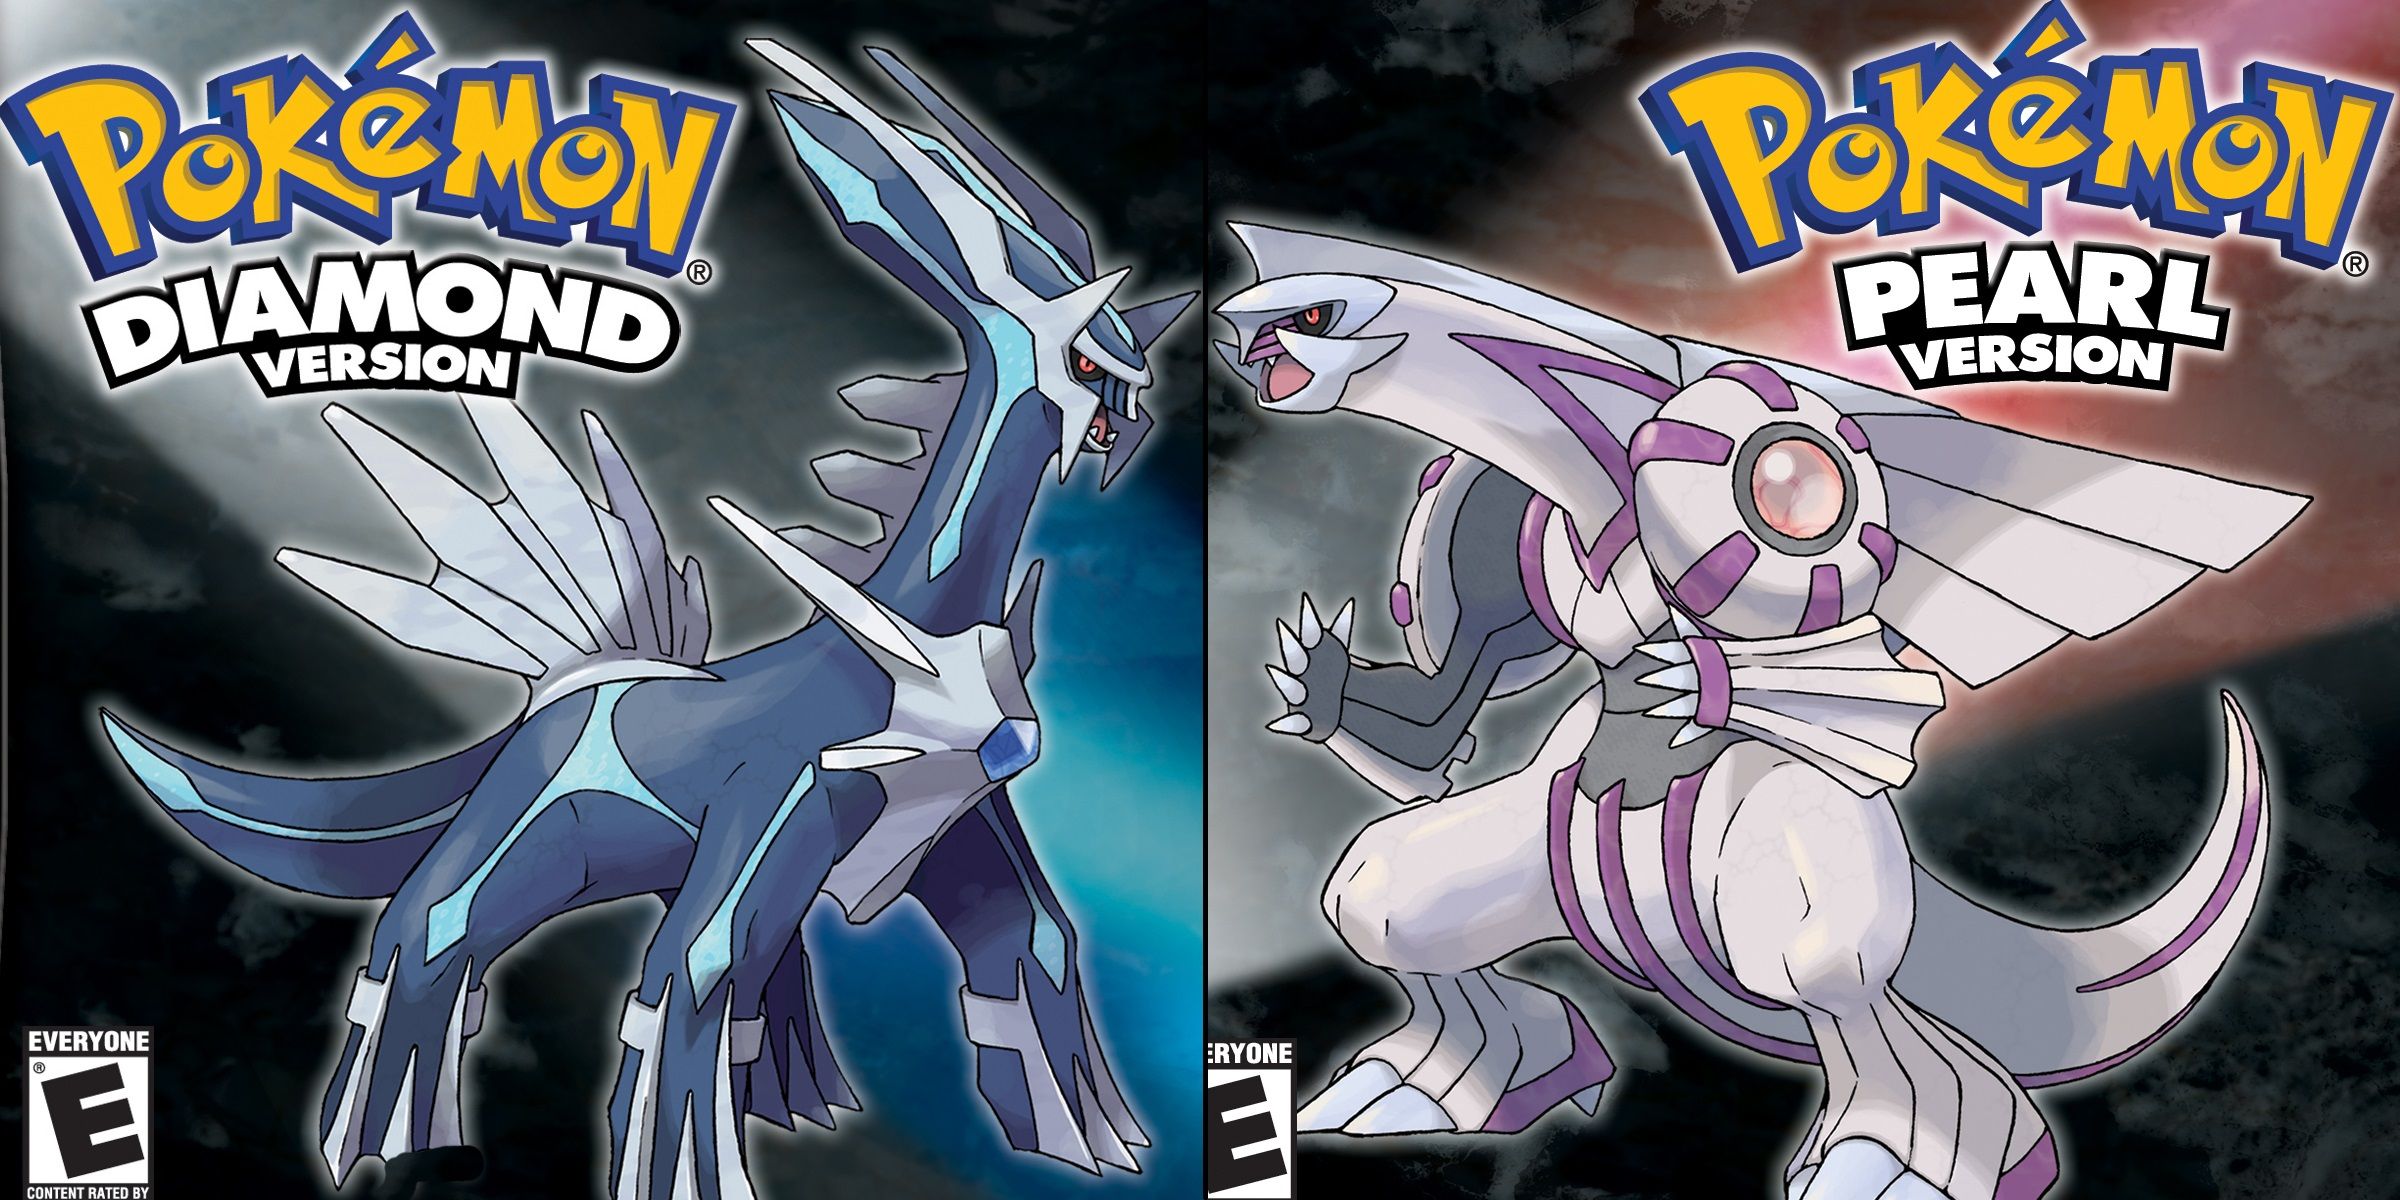 Pokemon Diamond and Pearl covers side by side.